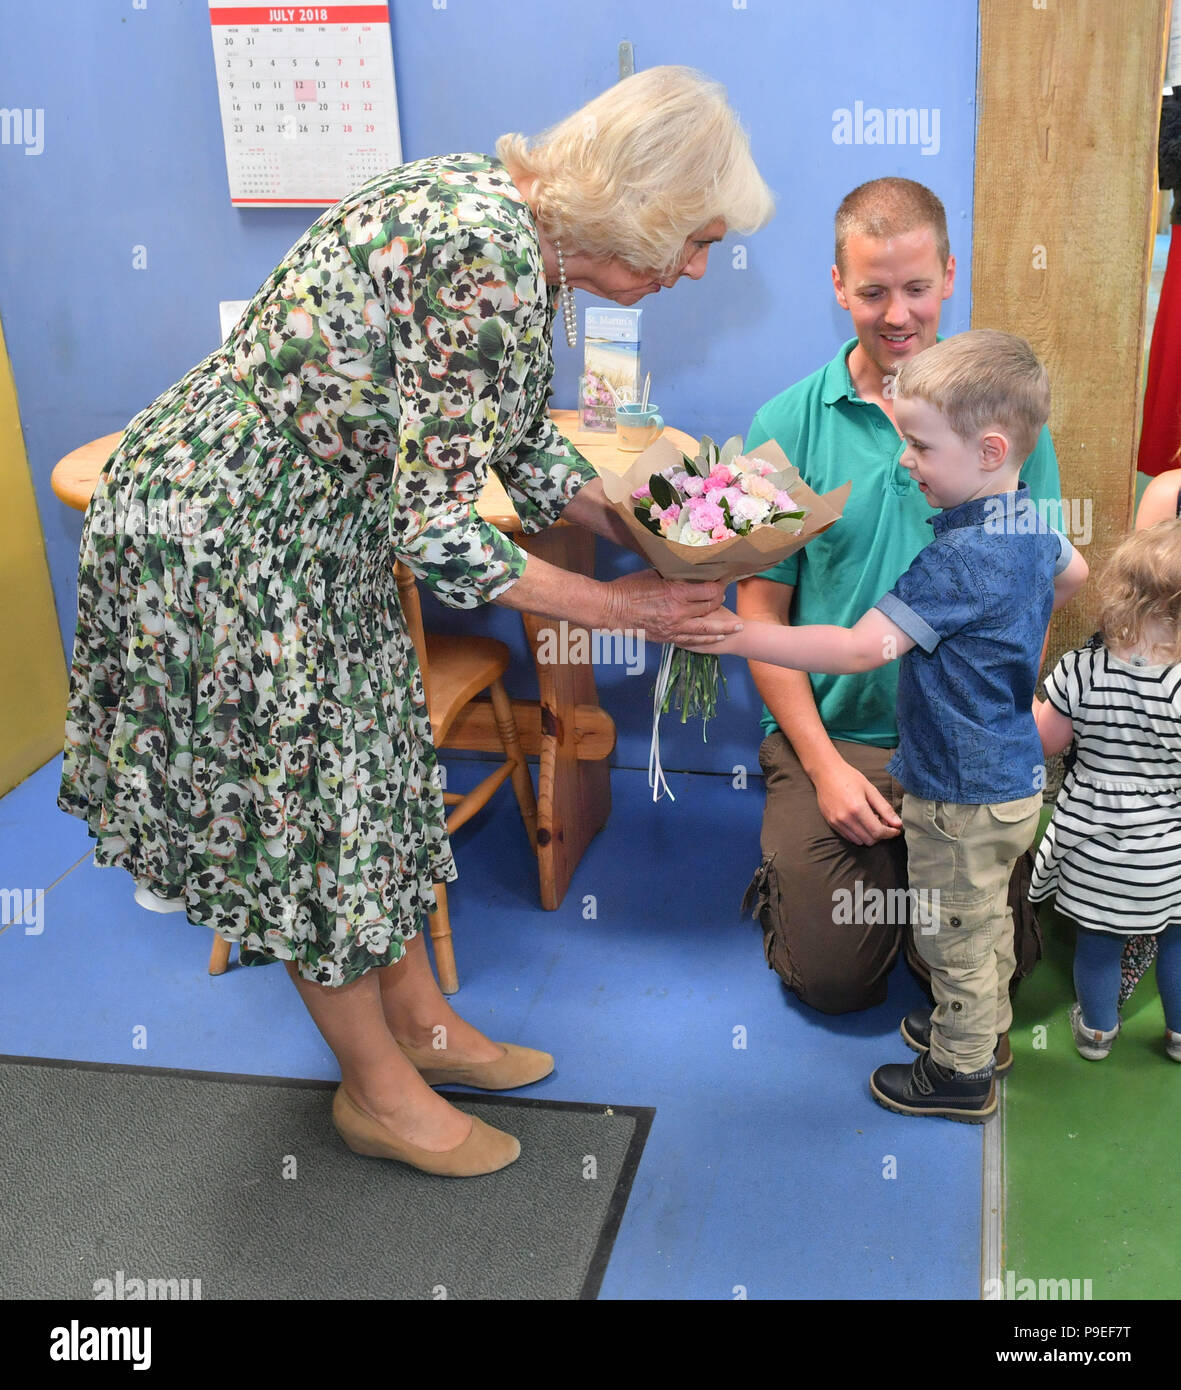 The Duchess of Cornwall is presented with flowers by four-year-old Jowan Haggerty as she visits Scilly Flowers during a visit to St Martin's, one of the Scilly Isles. Stock Photo